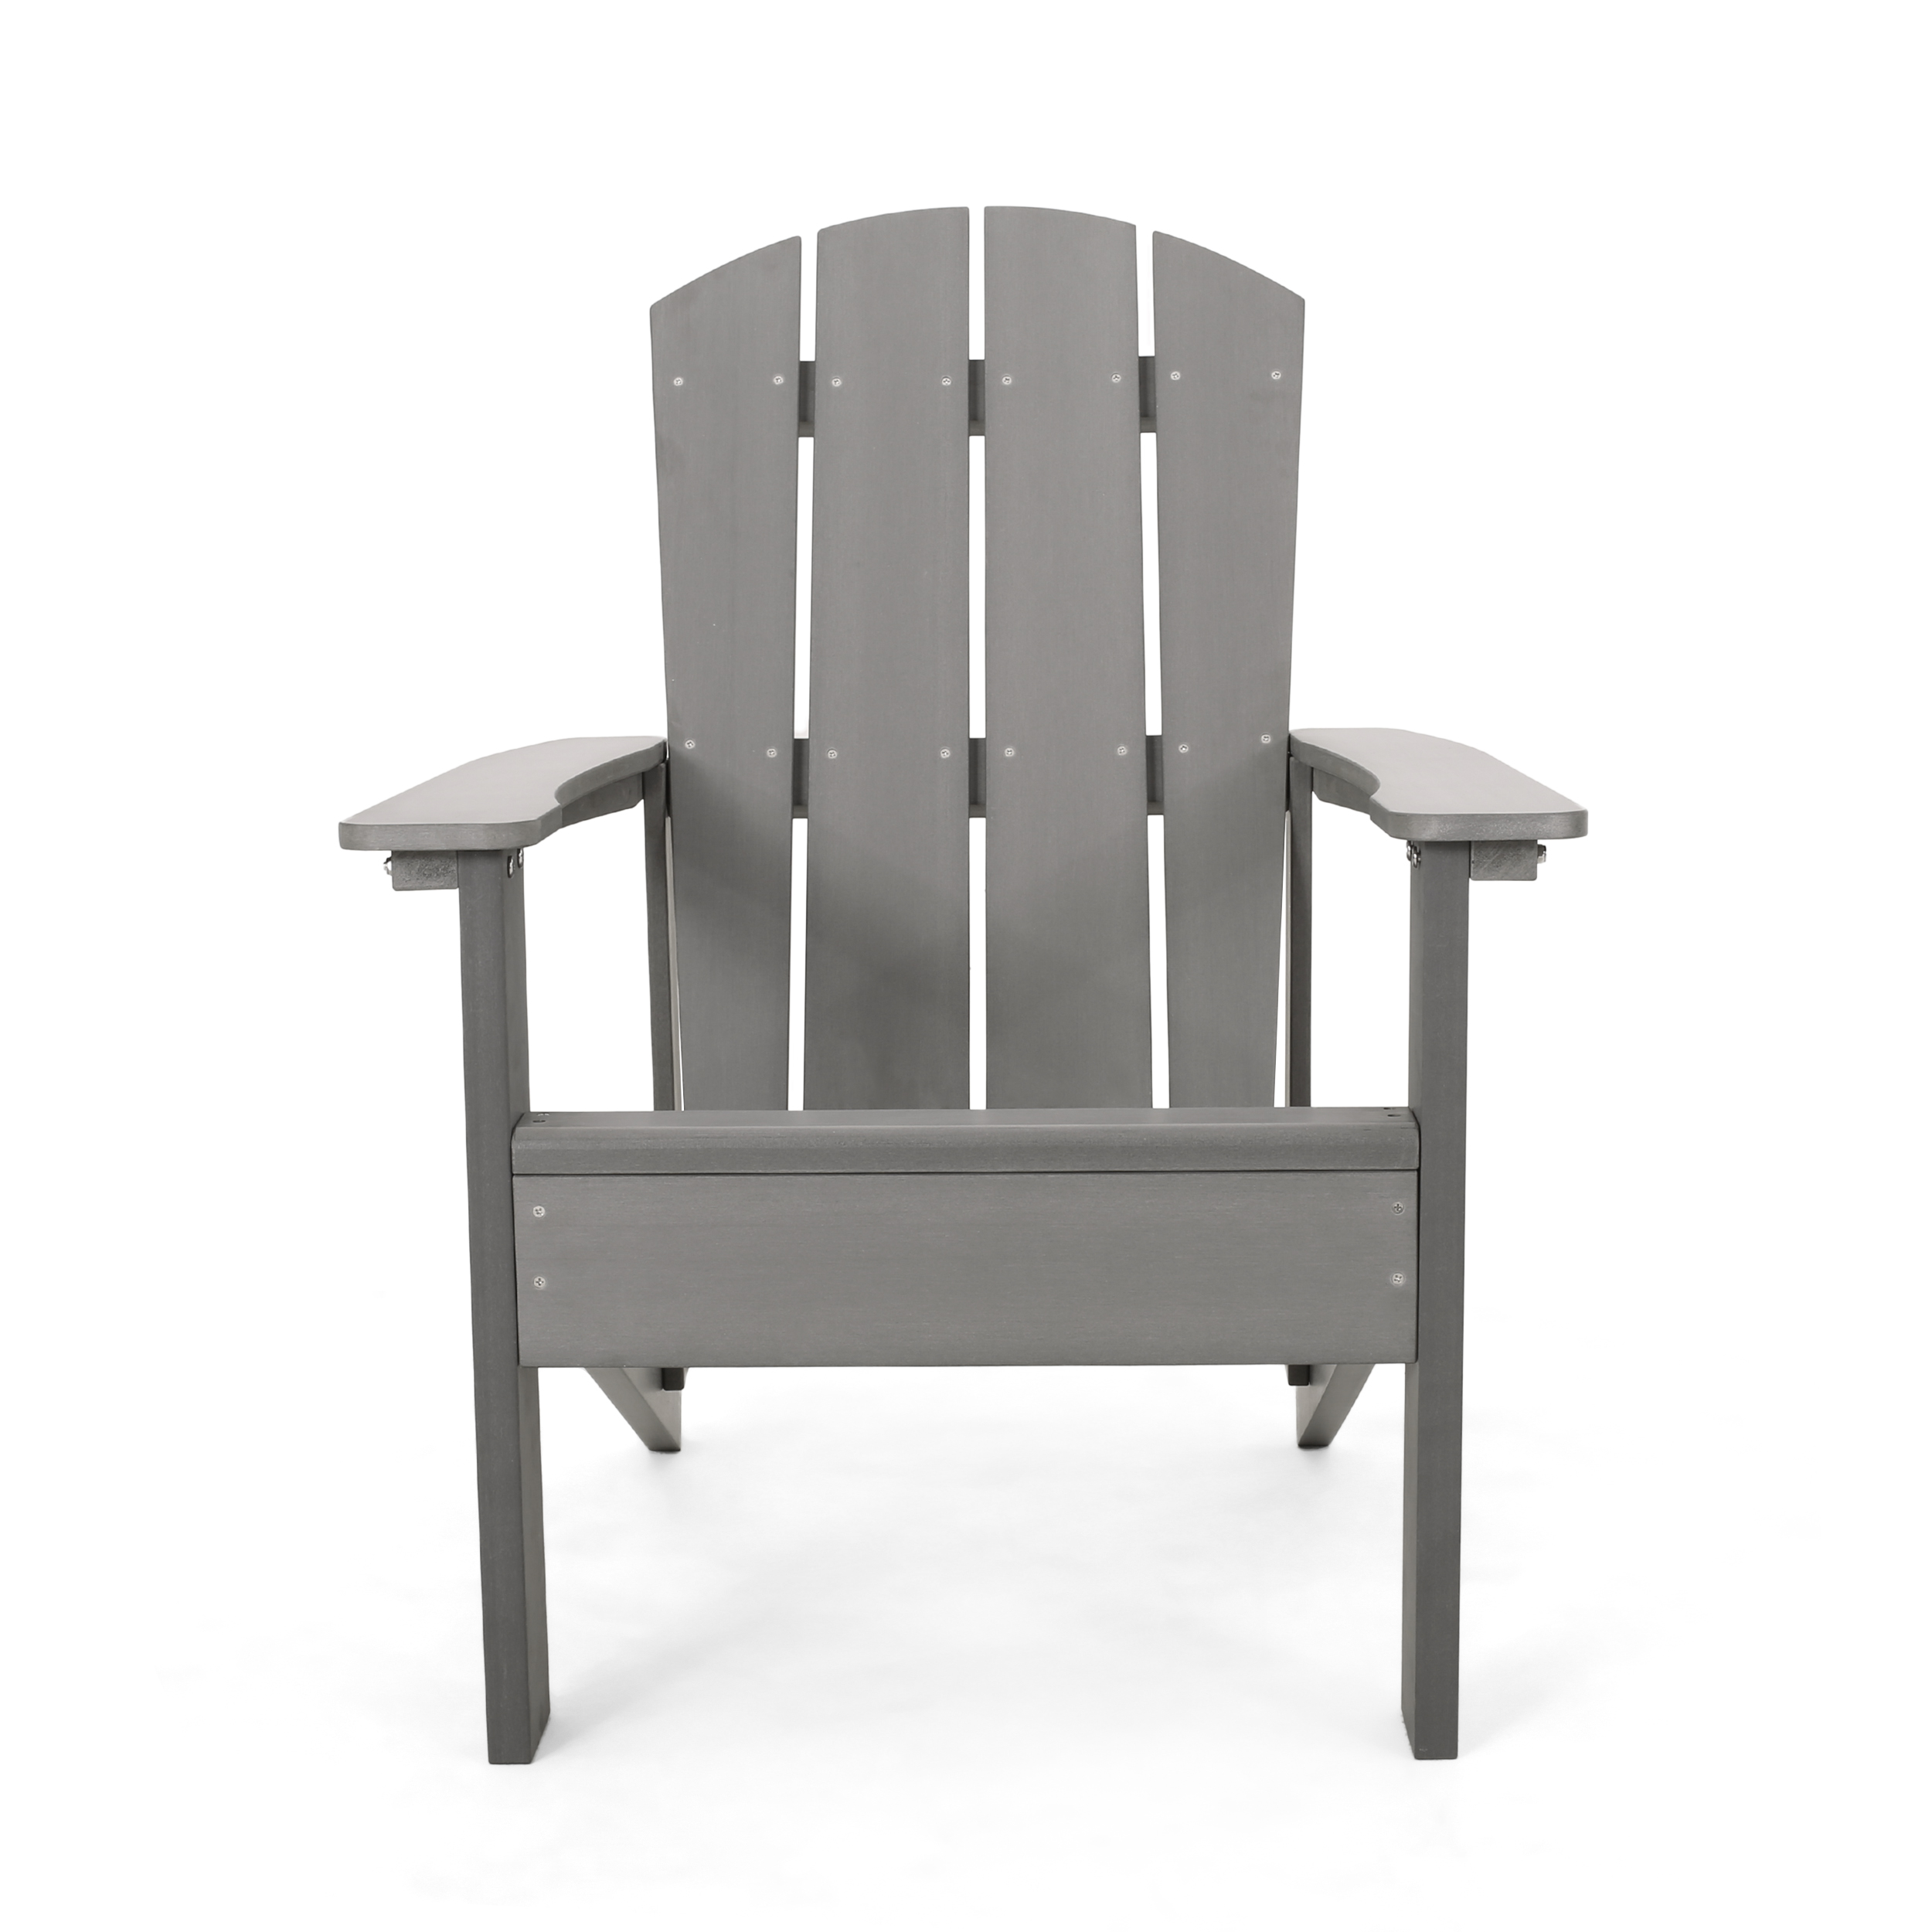 Classic Solid Gray Outdoor Solid Wood Adirondack Chair Garden Lounge Chair - image 2 of 9